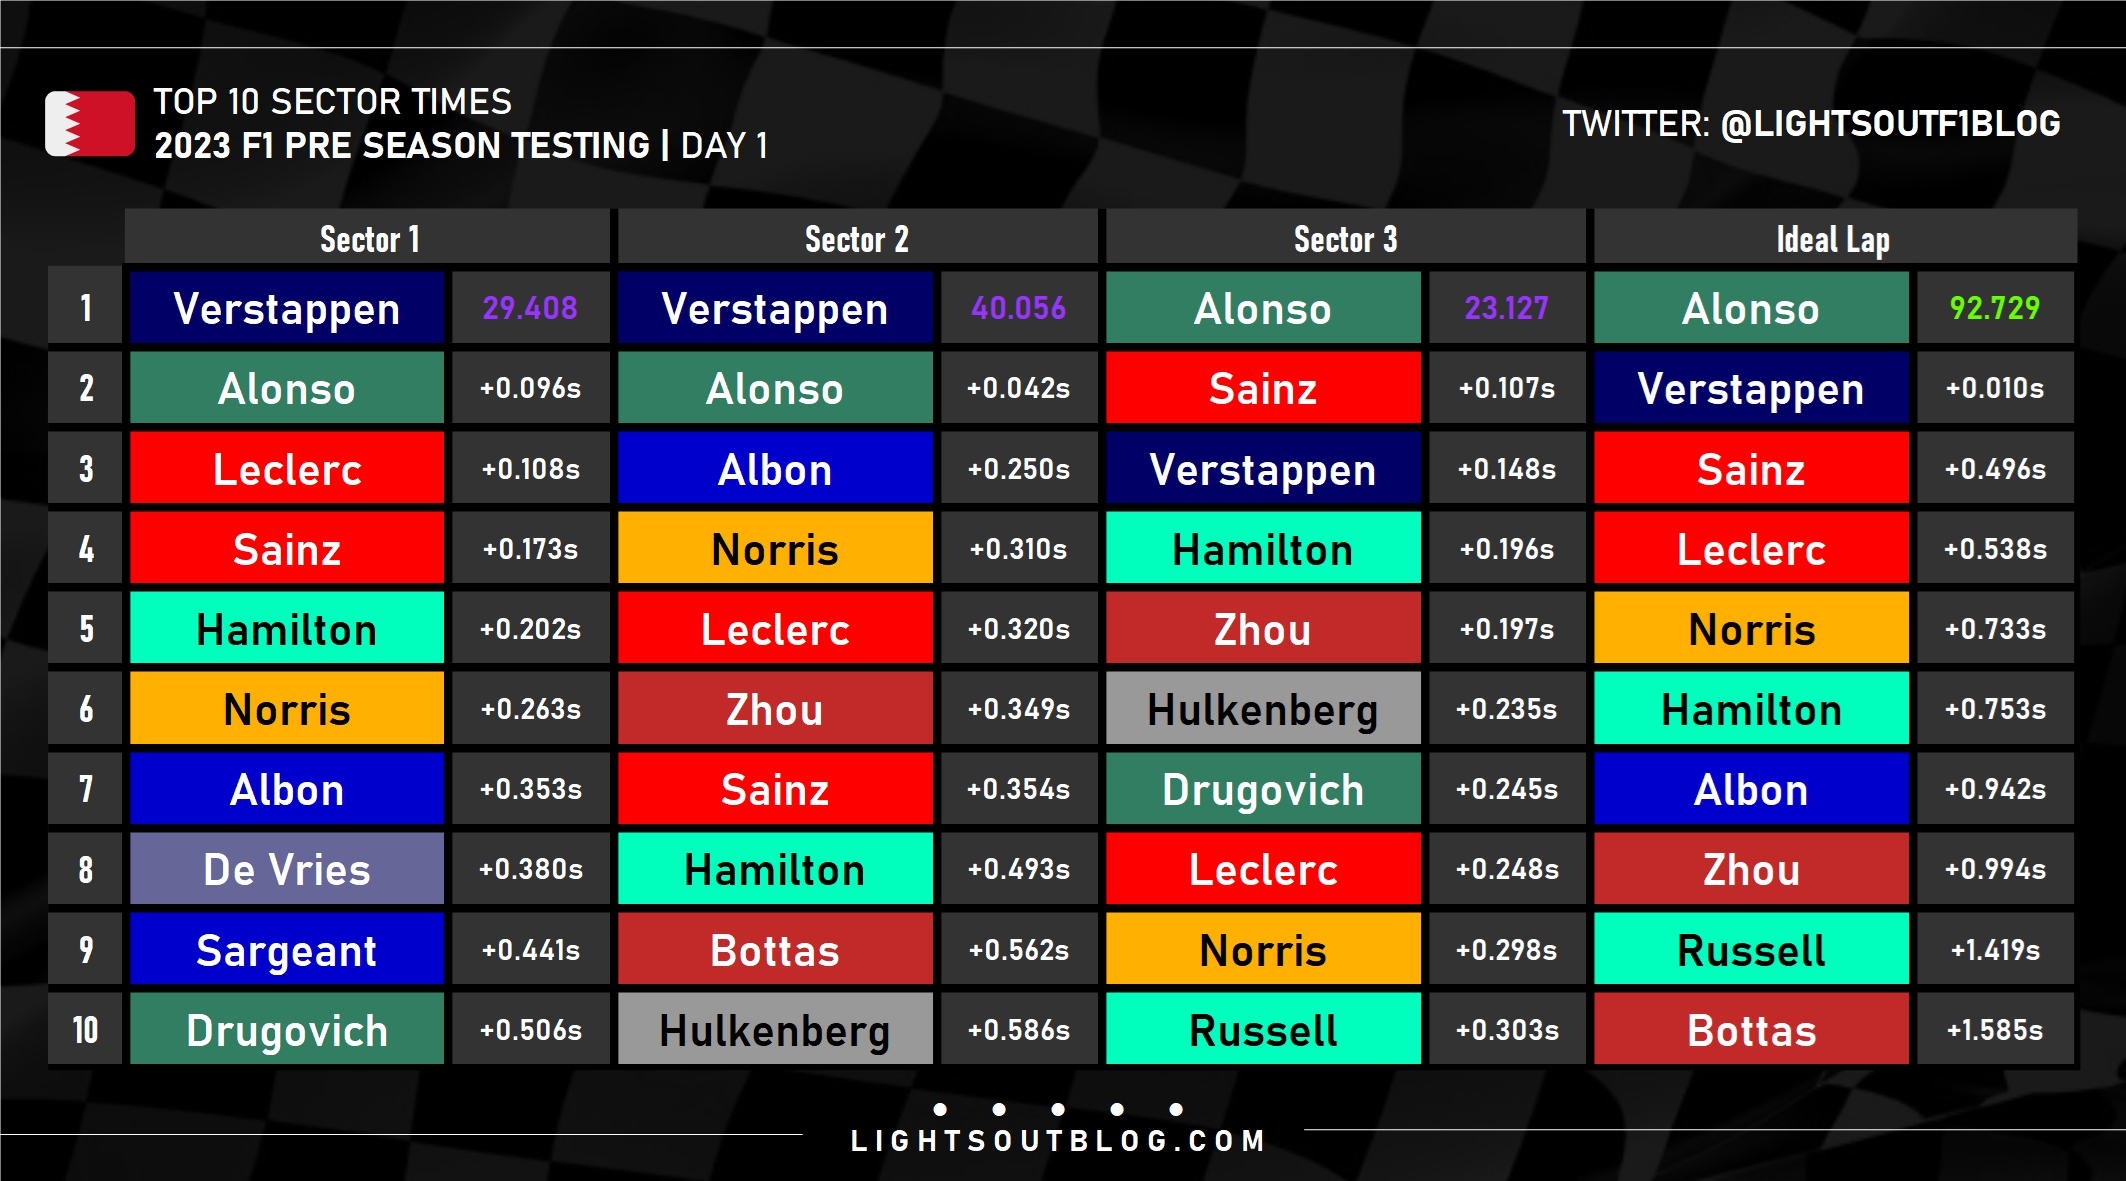 Top 10 team and driver sector times + ideal lap times on Day 1 2023